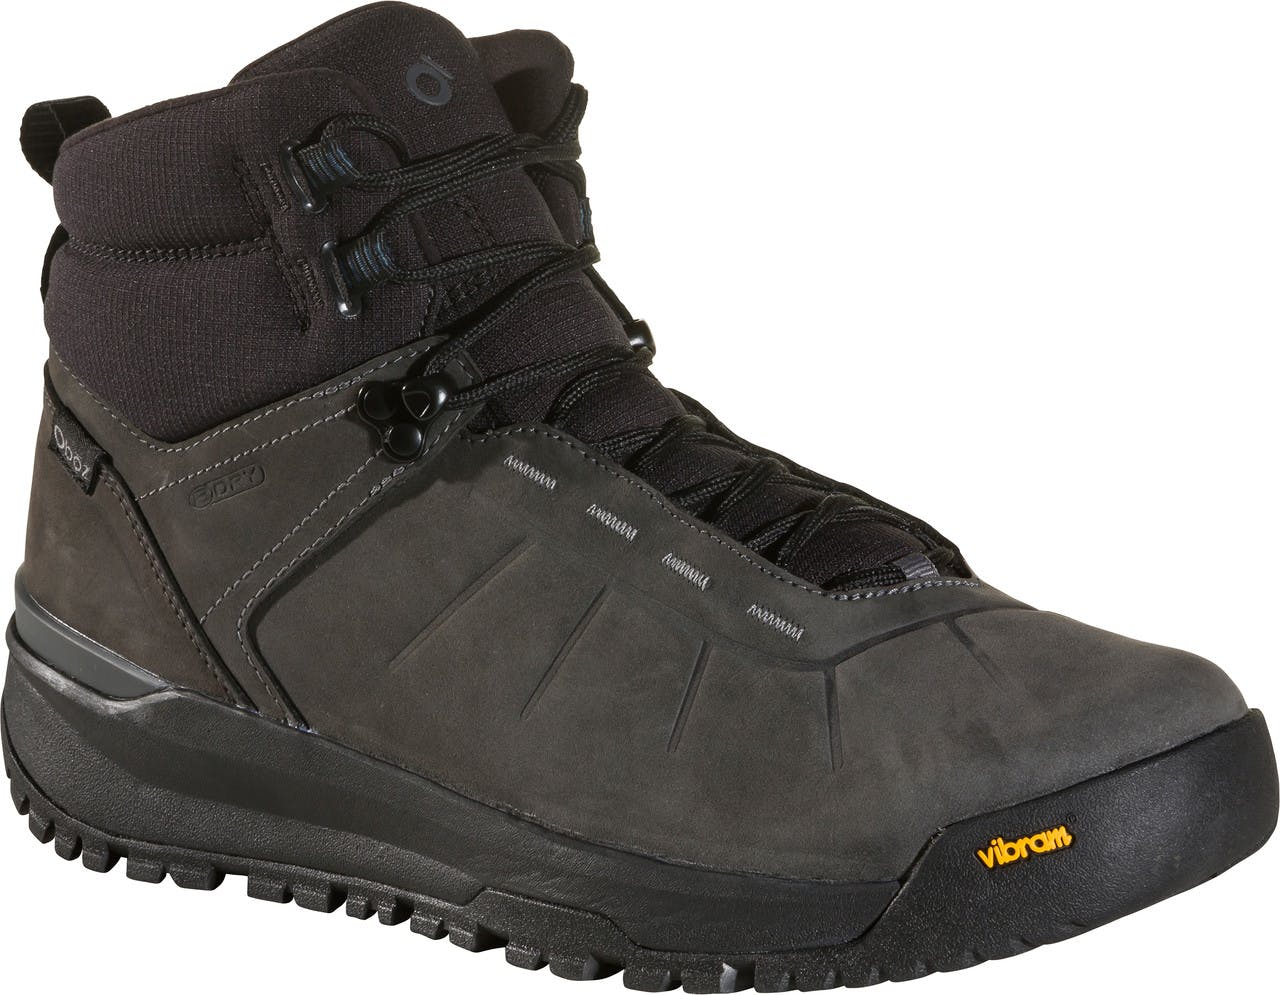 Andesite Insulated B-Dry Mid Light Trail Shoe Iron